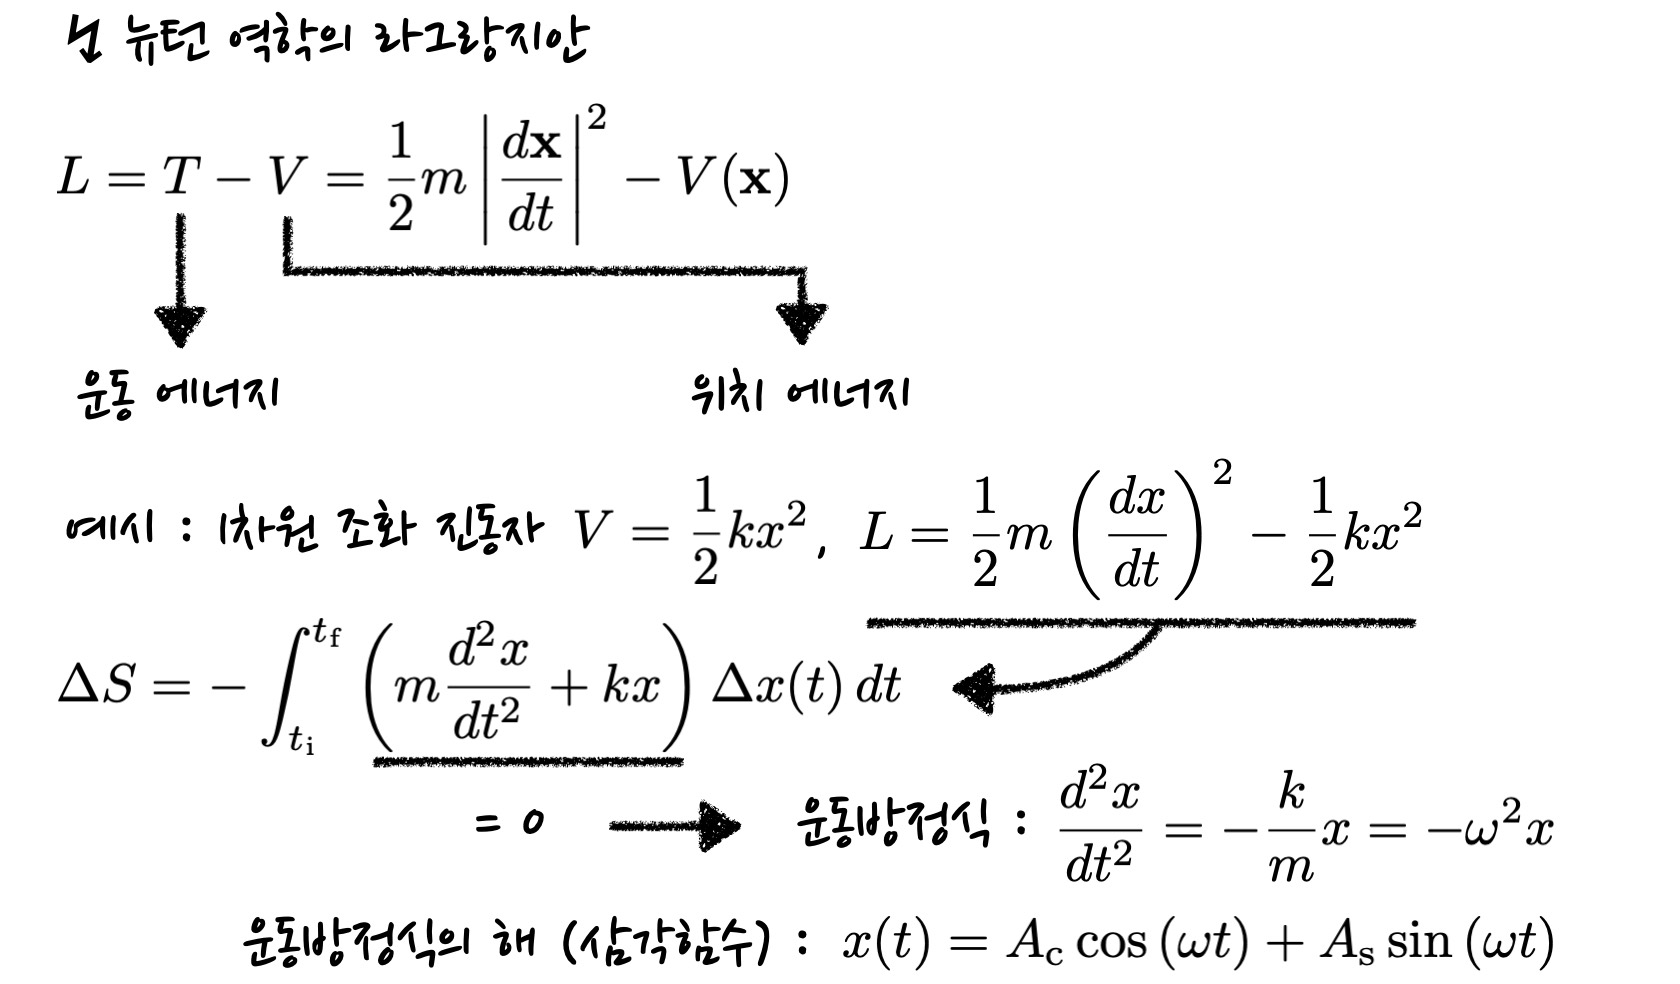 example of simple harmonic oscillator in the Lagrangian formulation, showing how to derive the equation of motion